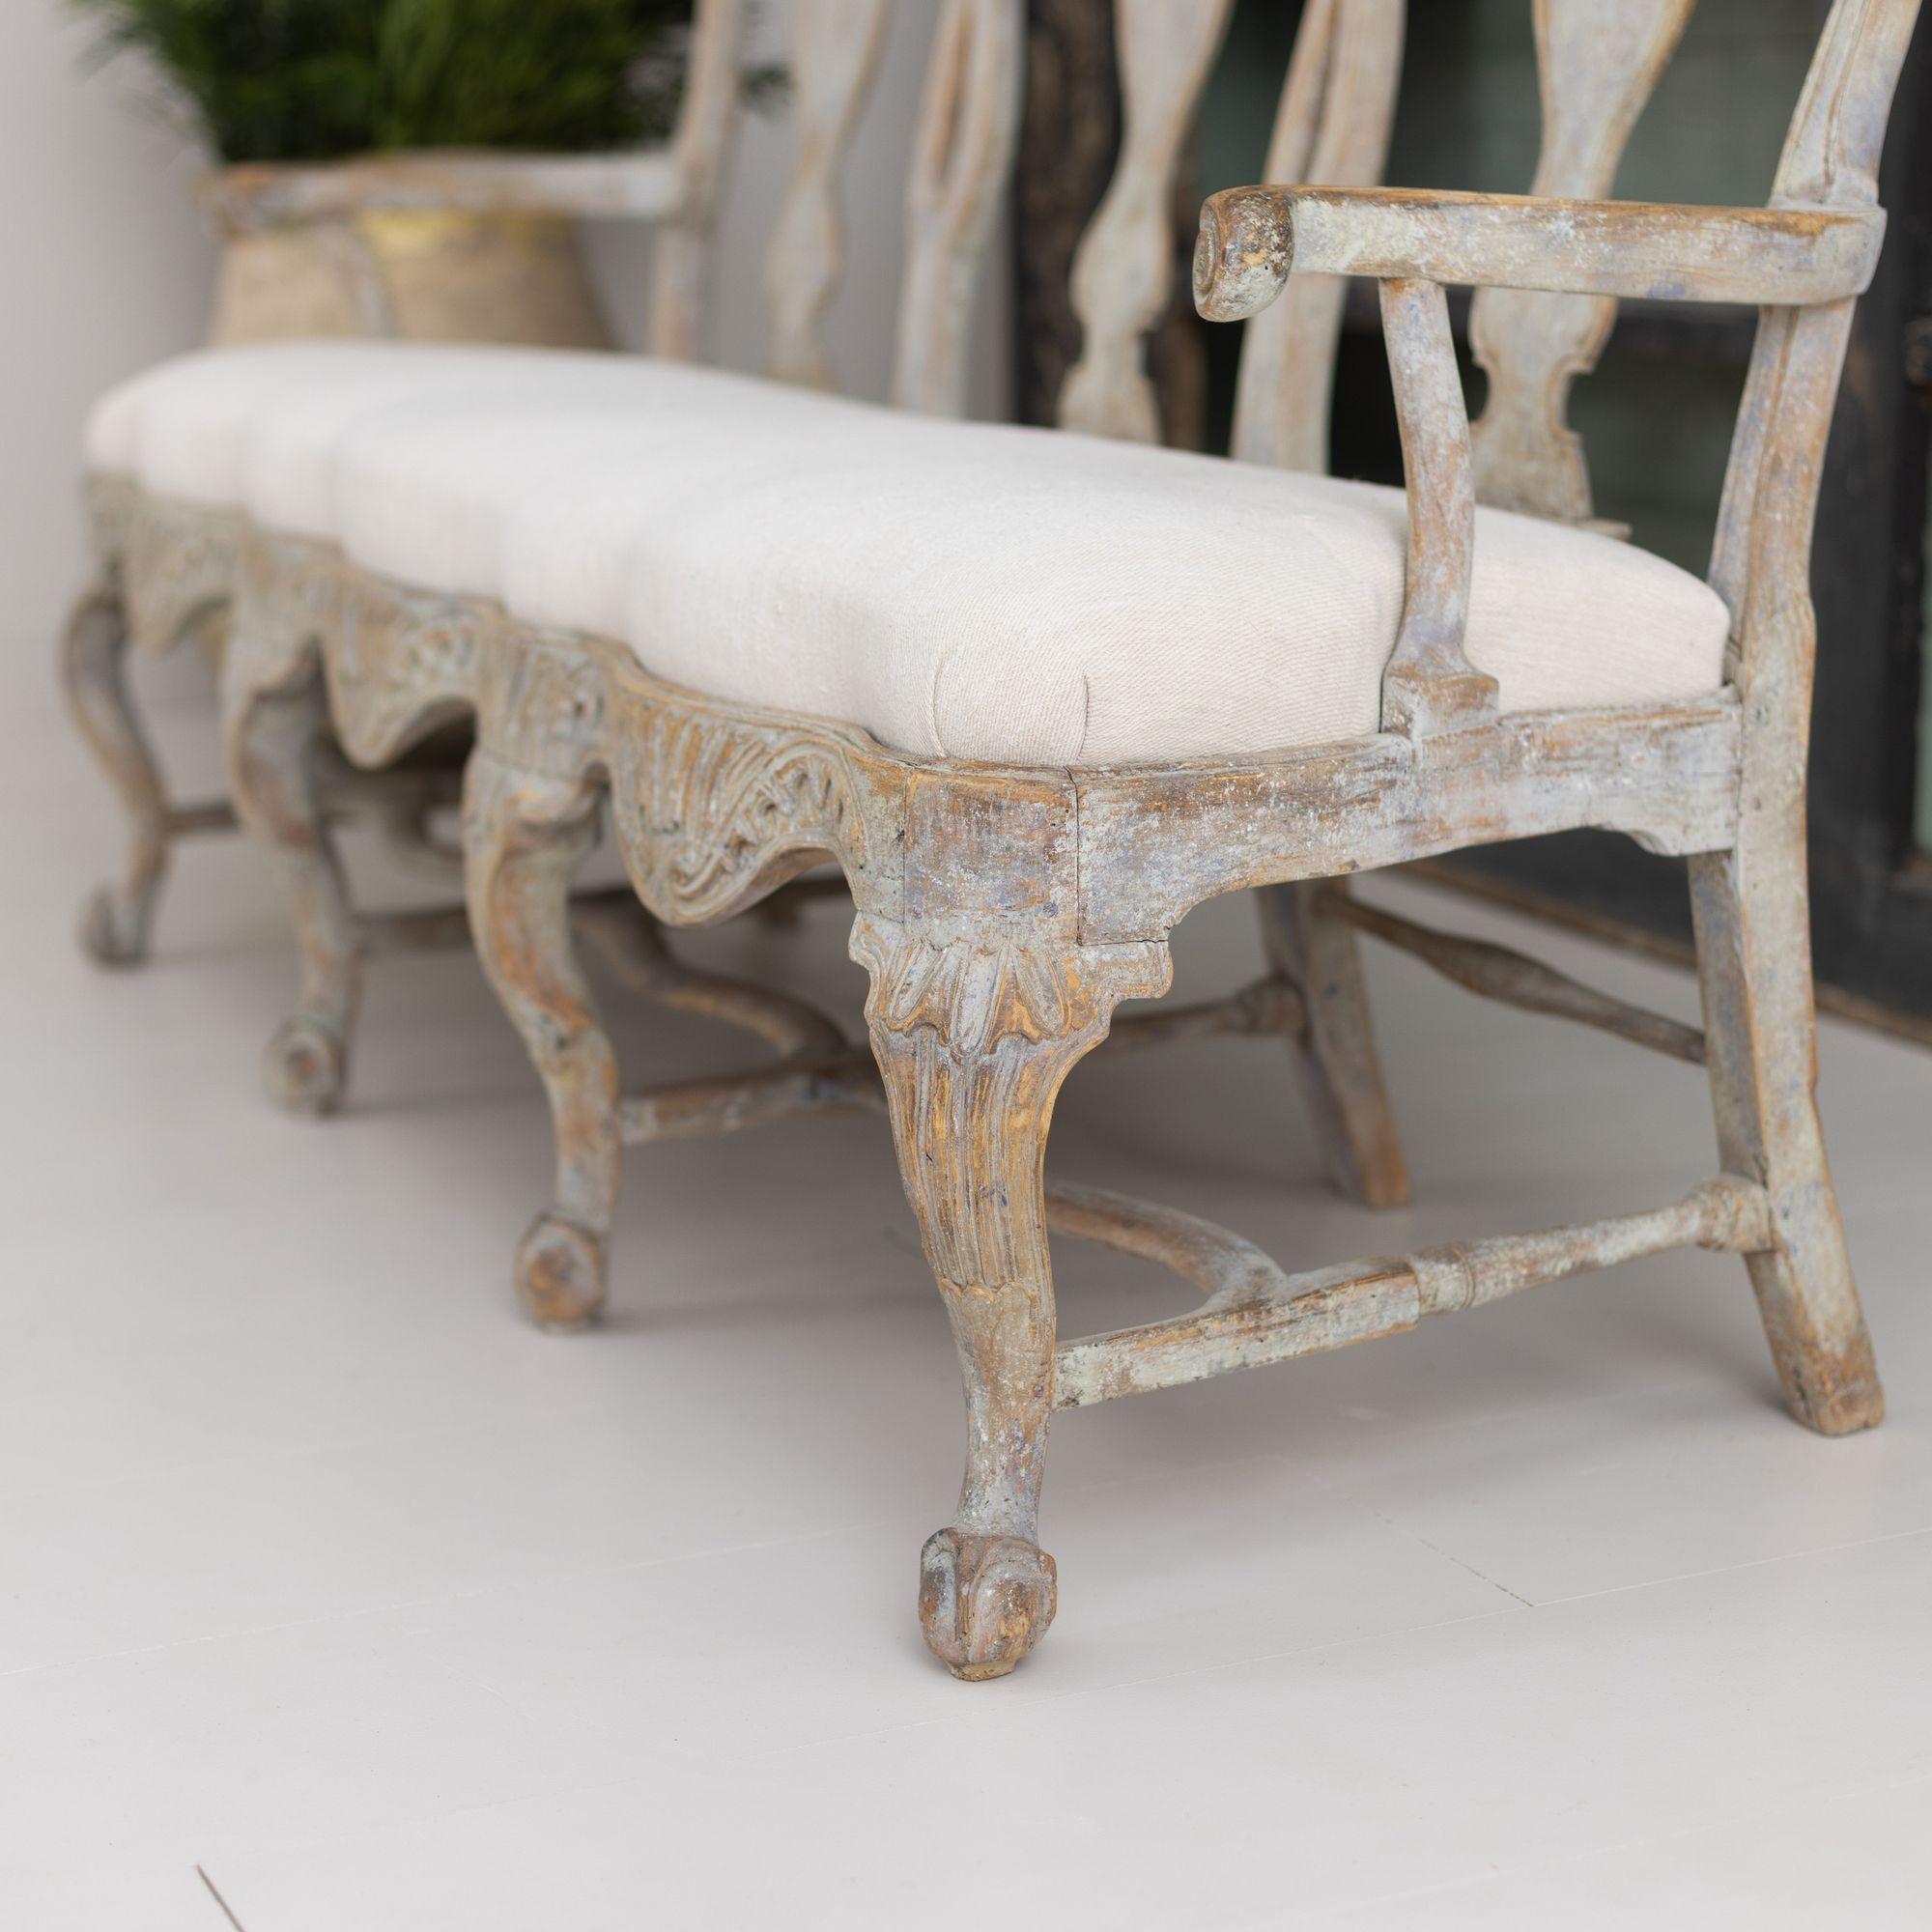 18th Century Swedish Rococo Period Settee or Sofa Bench in Original Paint For Sale 8